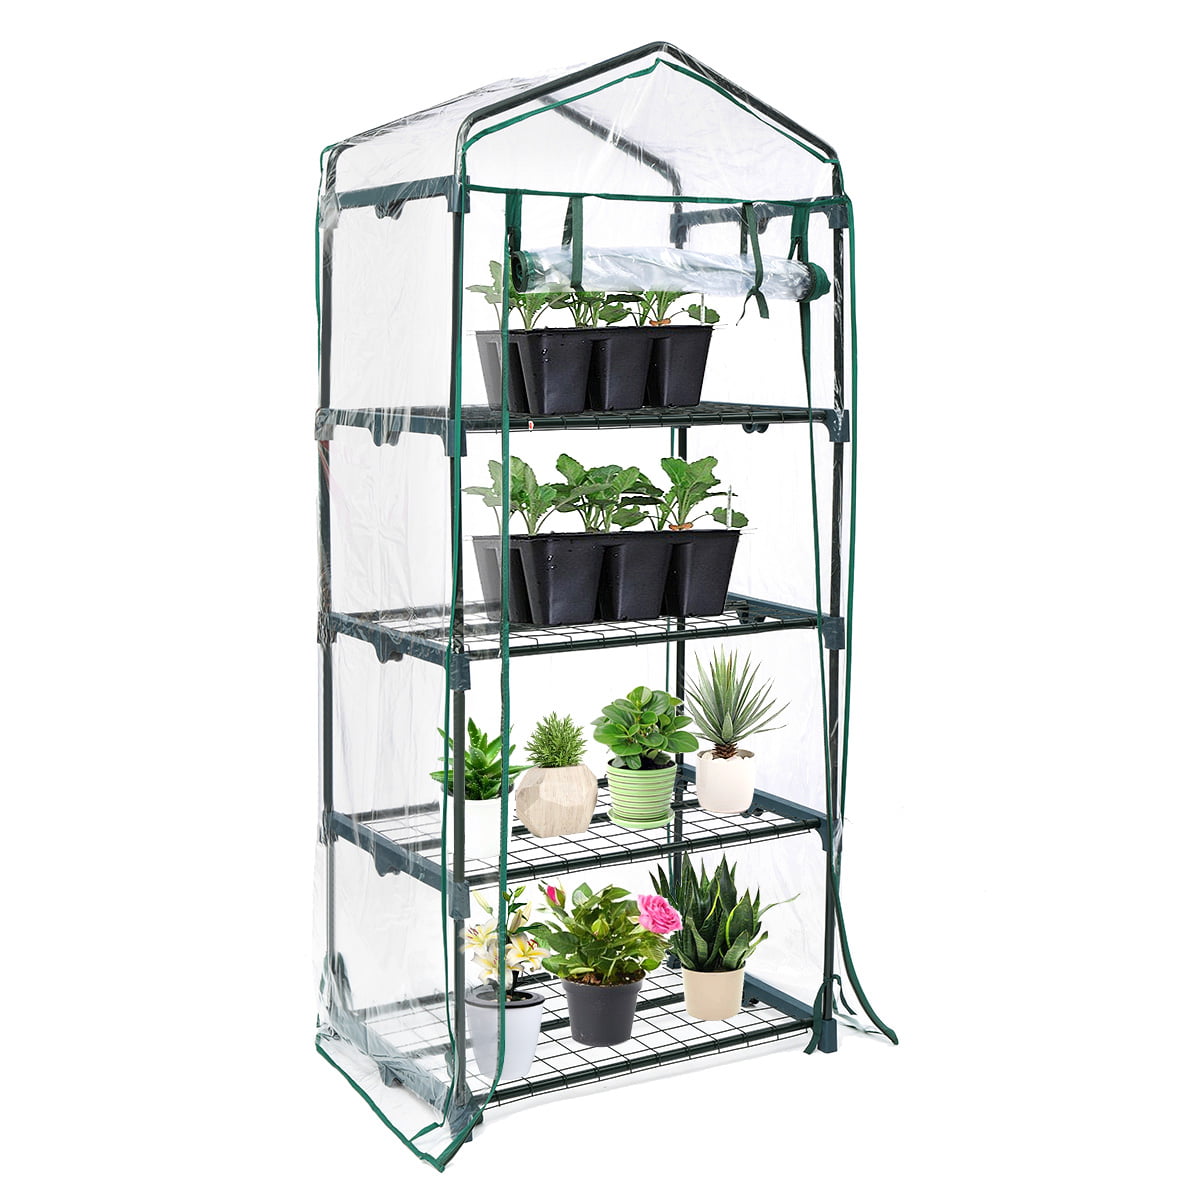 BonusAll 4 Tier Mini Greenhouse Green Outdoor Indoor Shelf Portable Garden with Lid Wheel and PVC Transparent Greenhouse Plant Flower Growth Tent Zipper Rolled 